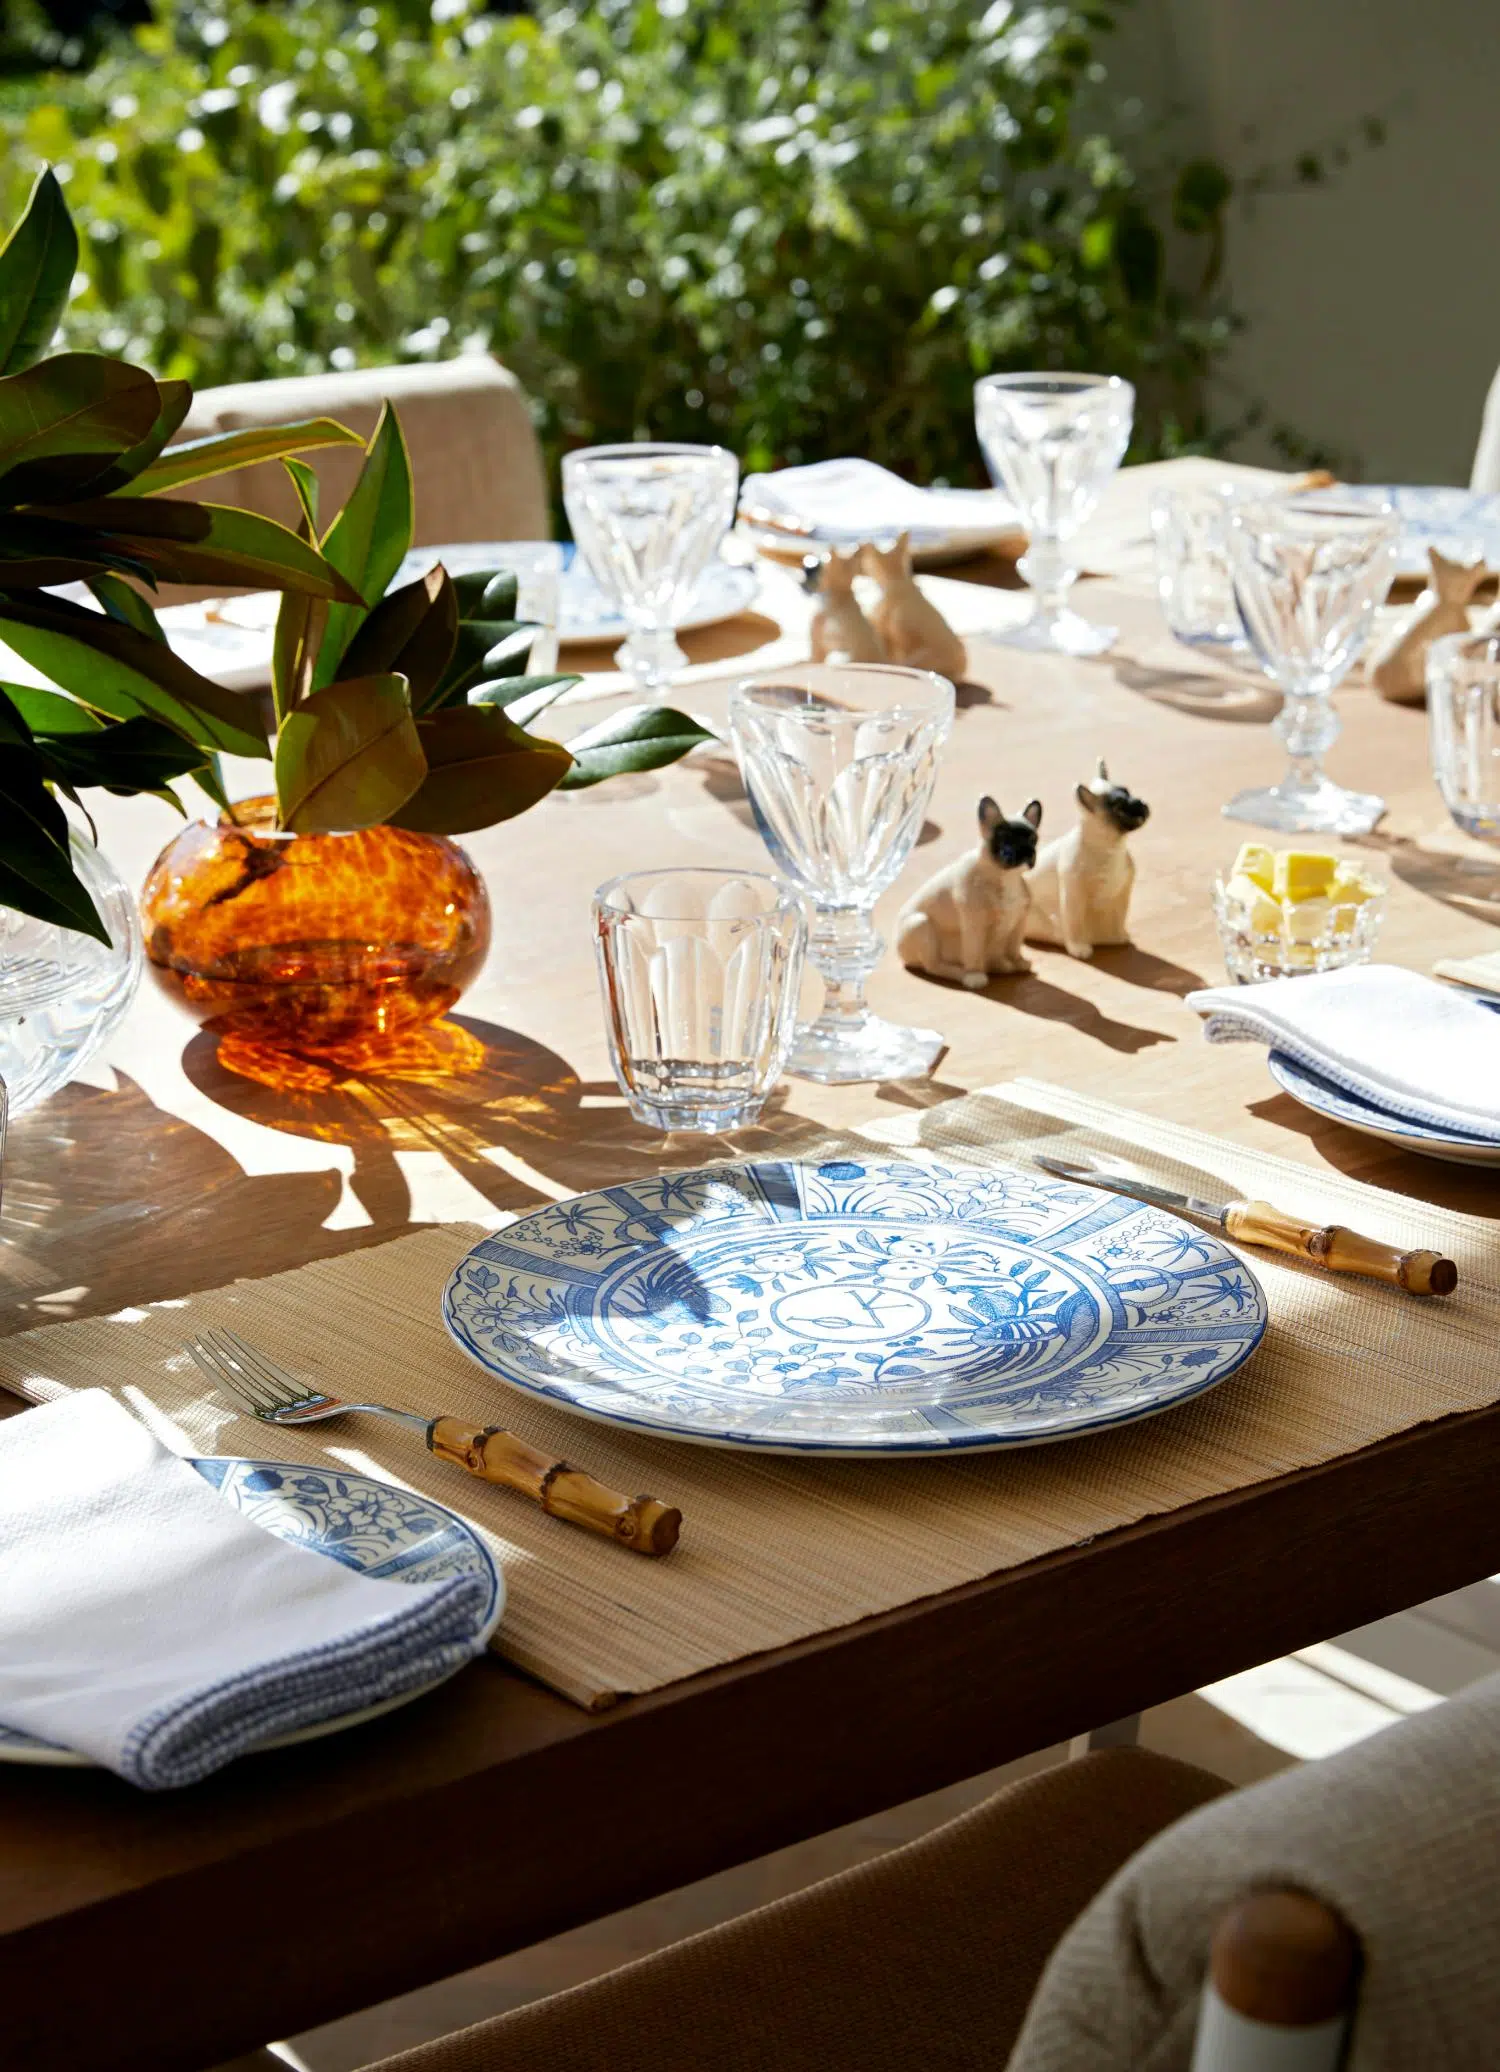 An outdoor, wooden dining table with crockery, cutlery and glassware on top.